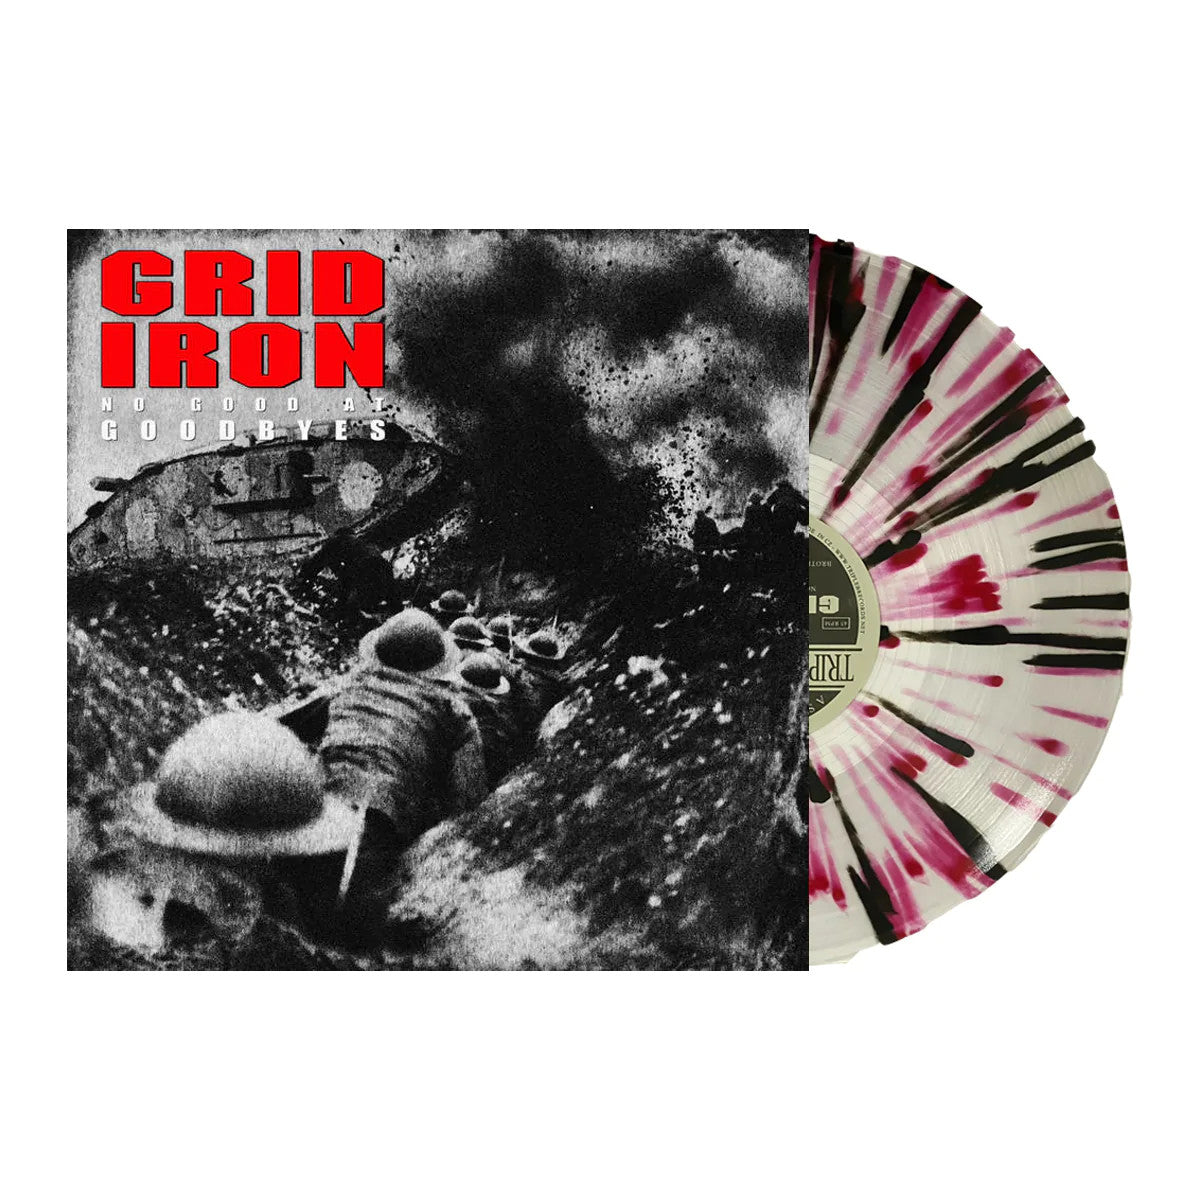 Gridiron- No Good At Goodbyes (Clear w/Red & Black Splatter) - Darkside Records